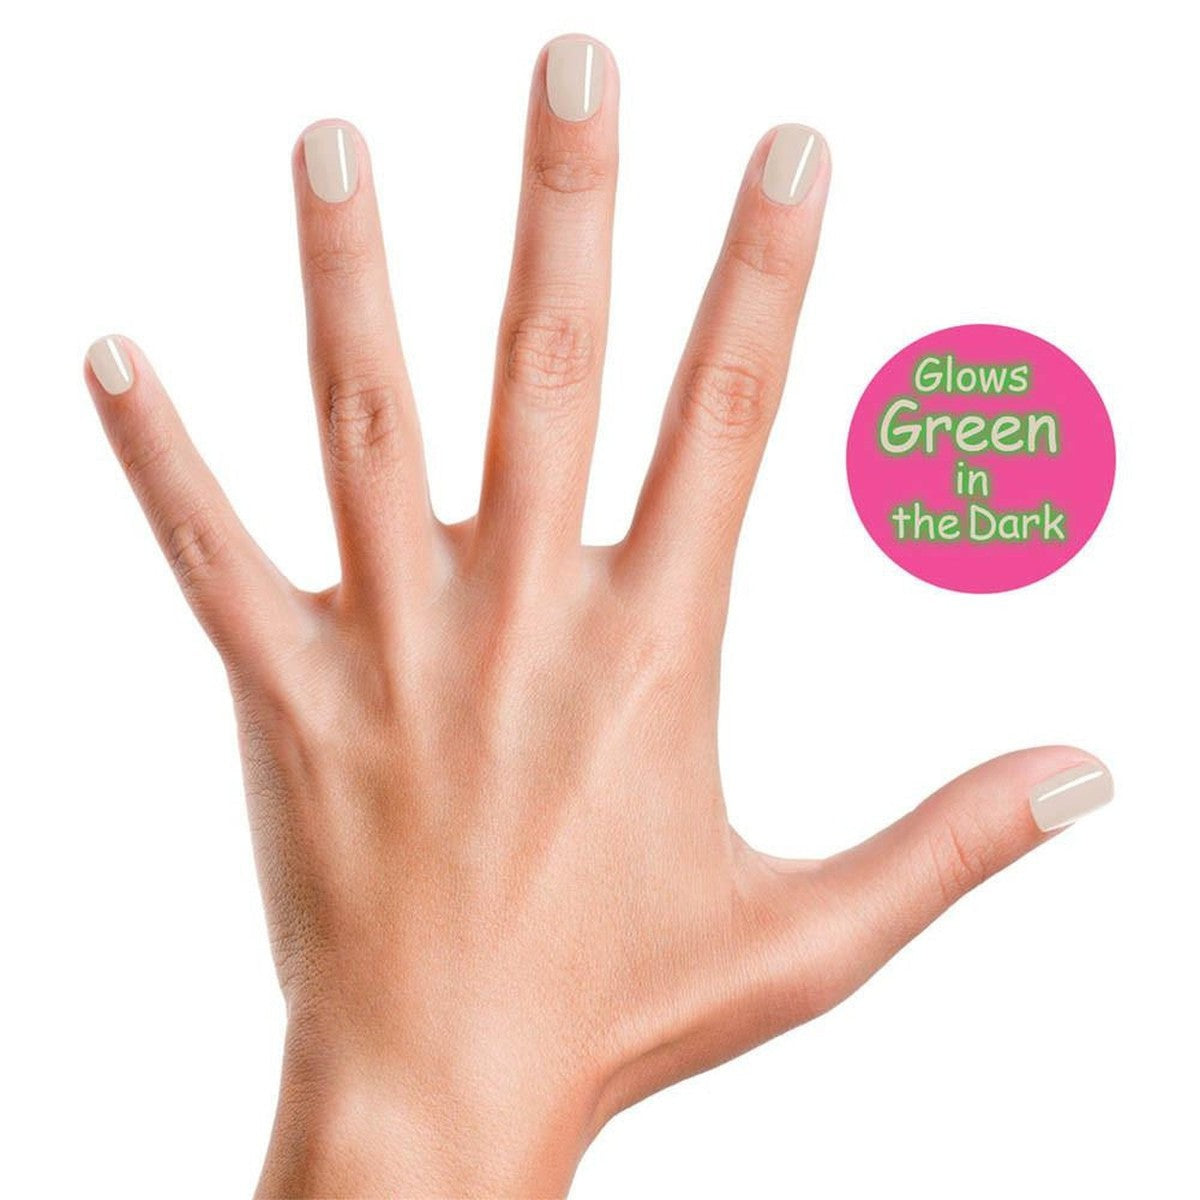 radioactive glow in the dark natural piggy paint nail polish-accessories-Clementine/Stortz-Dilly Dally Kids